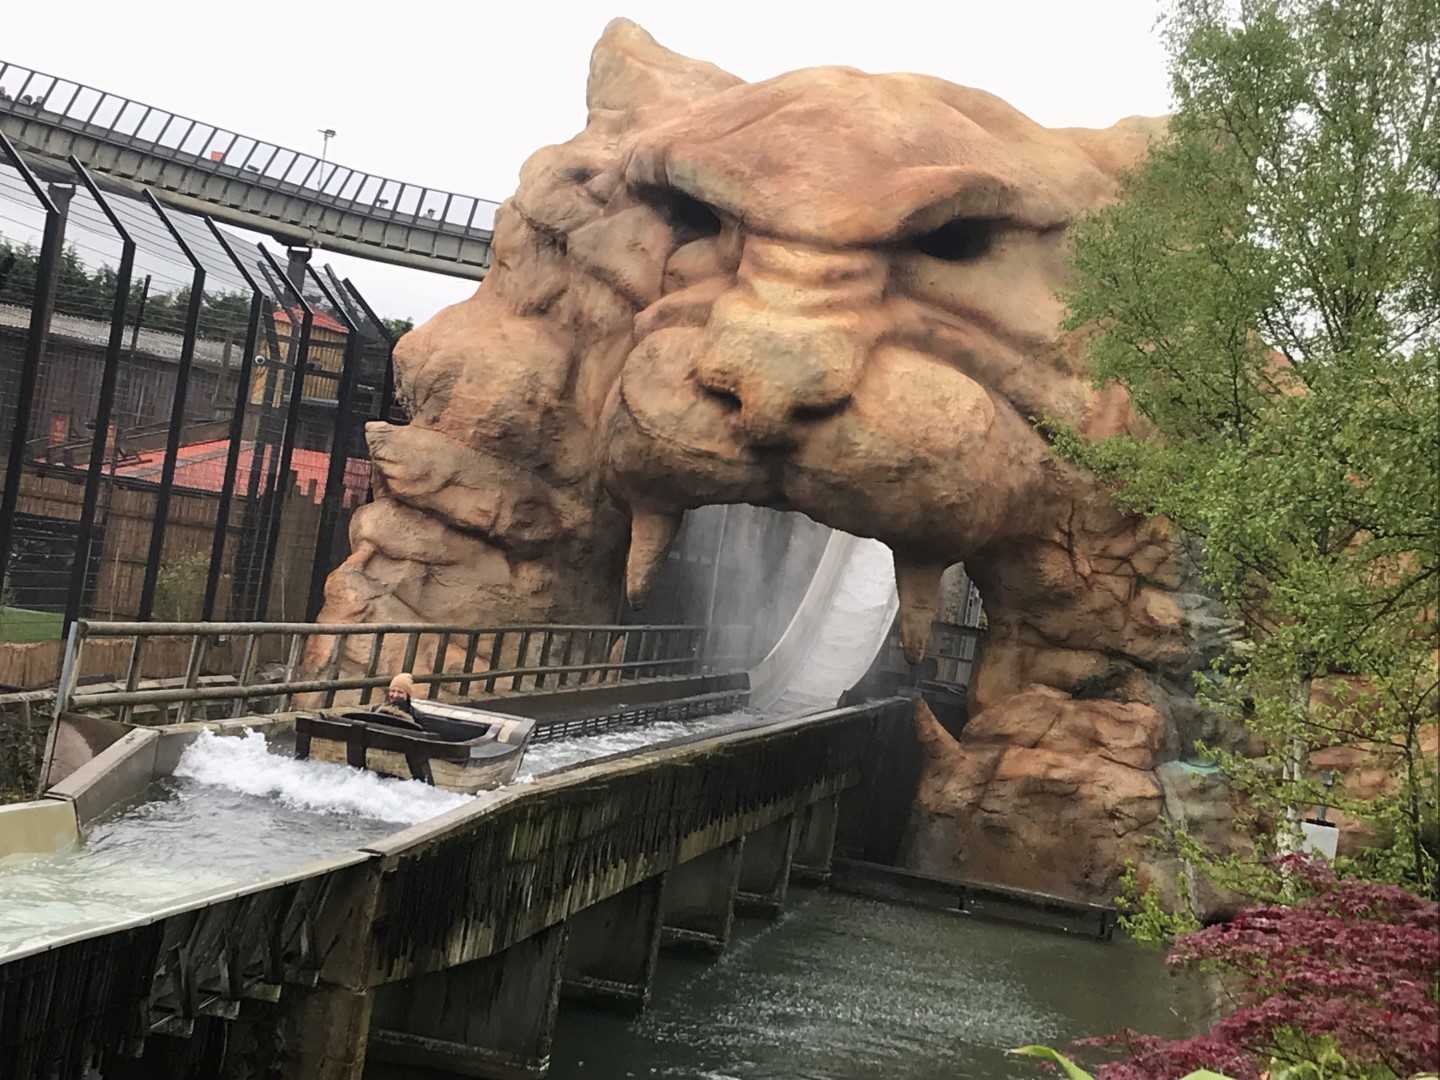 Review: Tiger Rock at Chessington World of Adventures